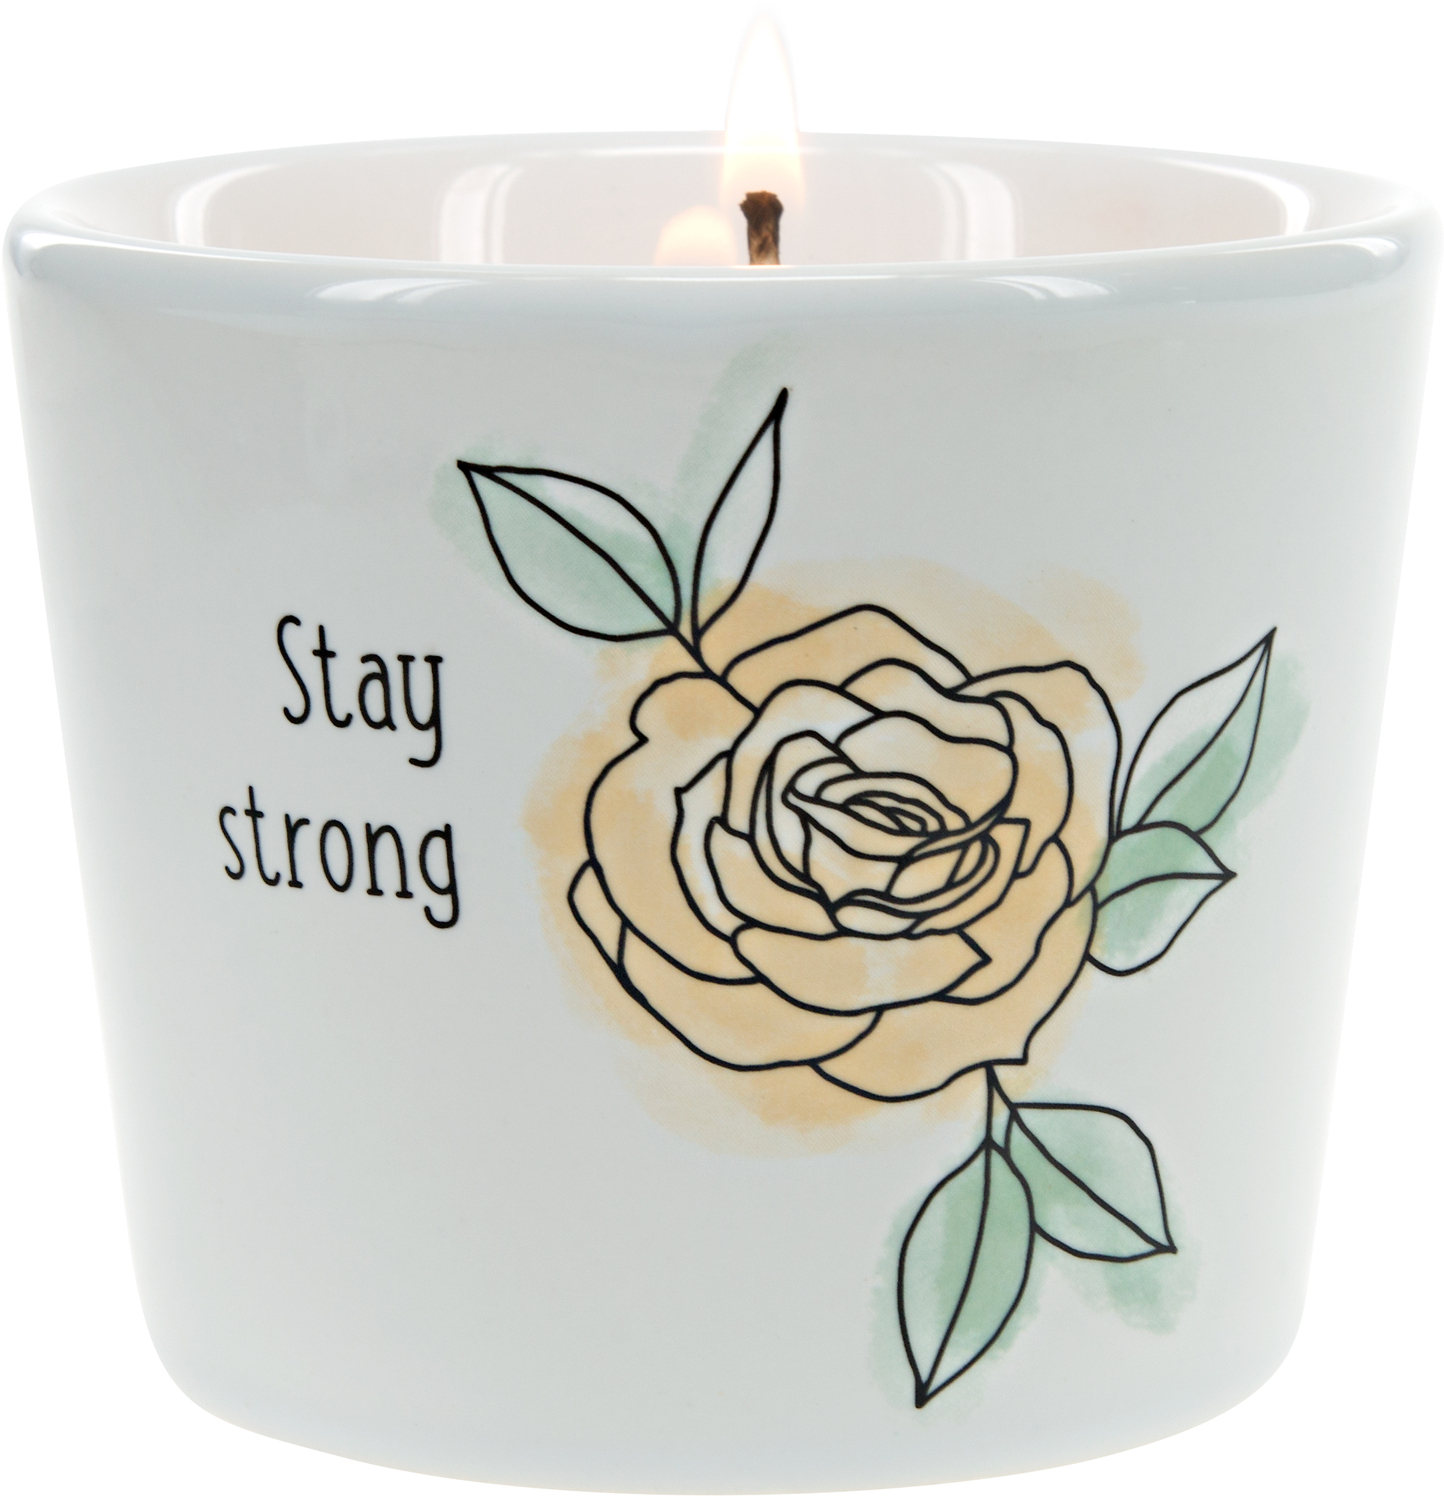 Stay Strong by Faith Hope and Healing - Stay Strong - 8 oz - 100% Soy Wax Candle Scent: Tranquility